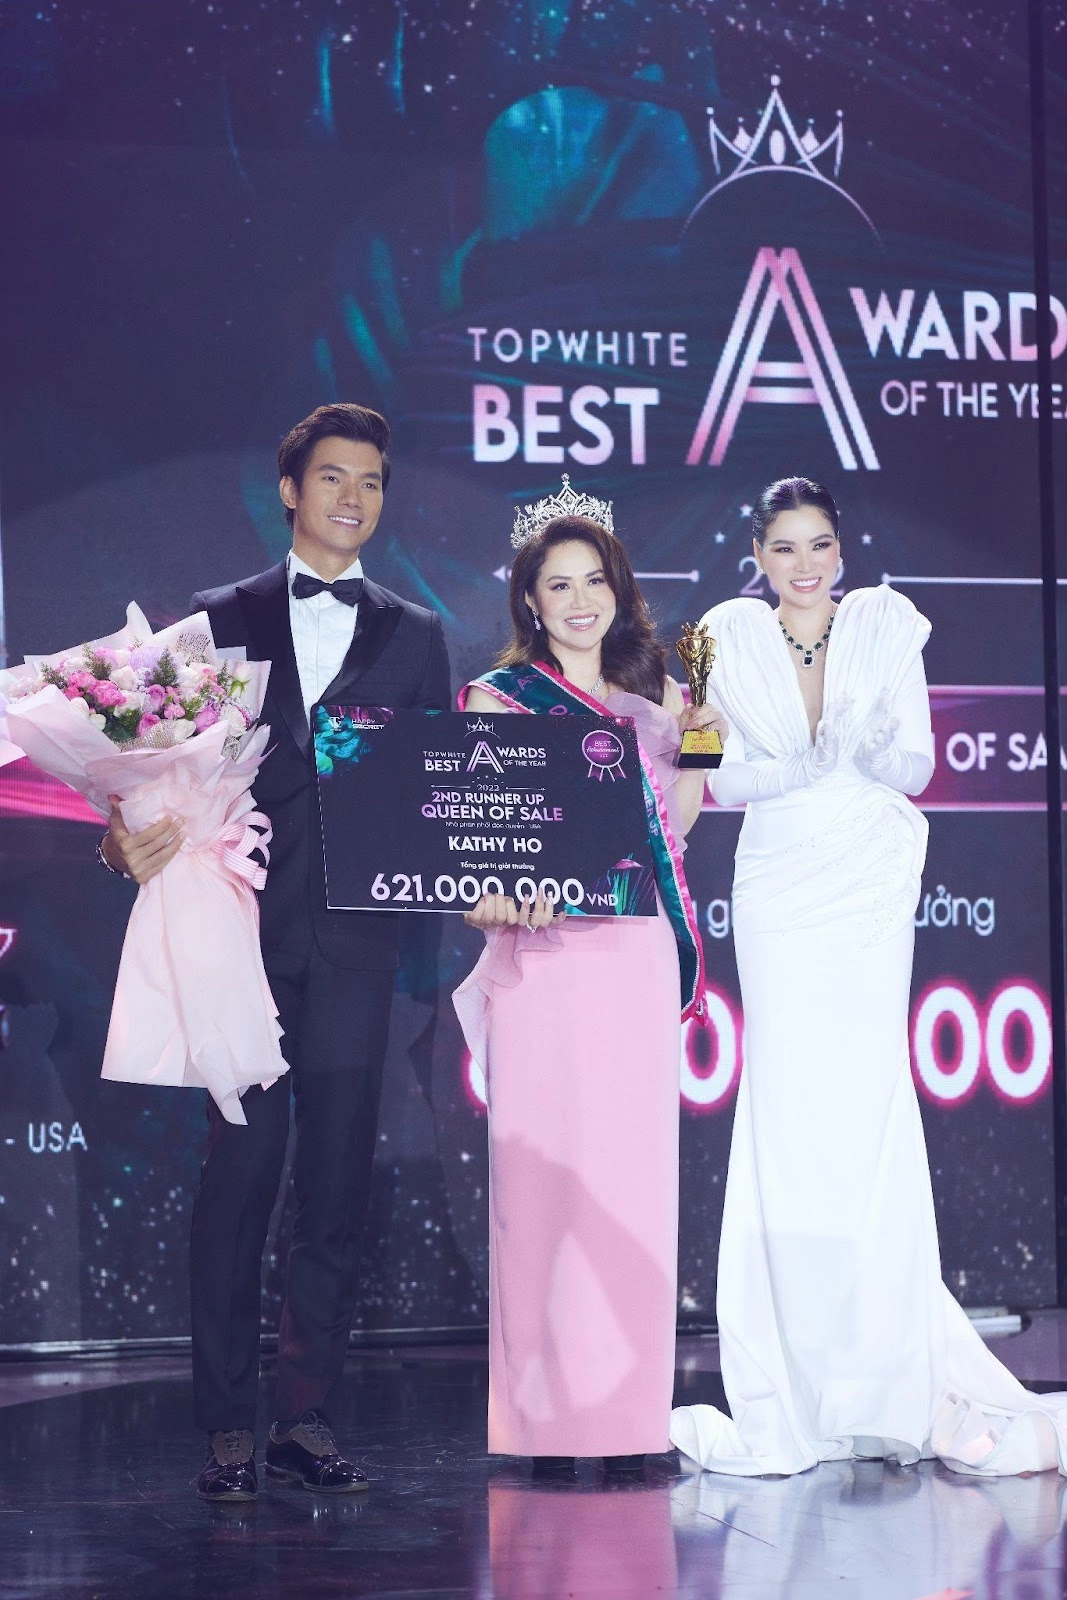 top white best awards of the year 2022 lộ diện á hoàng sale 2 kathy ho - 2